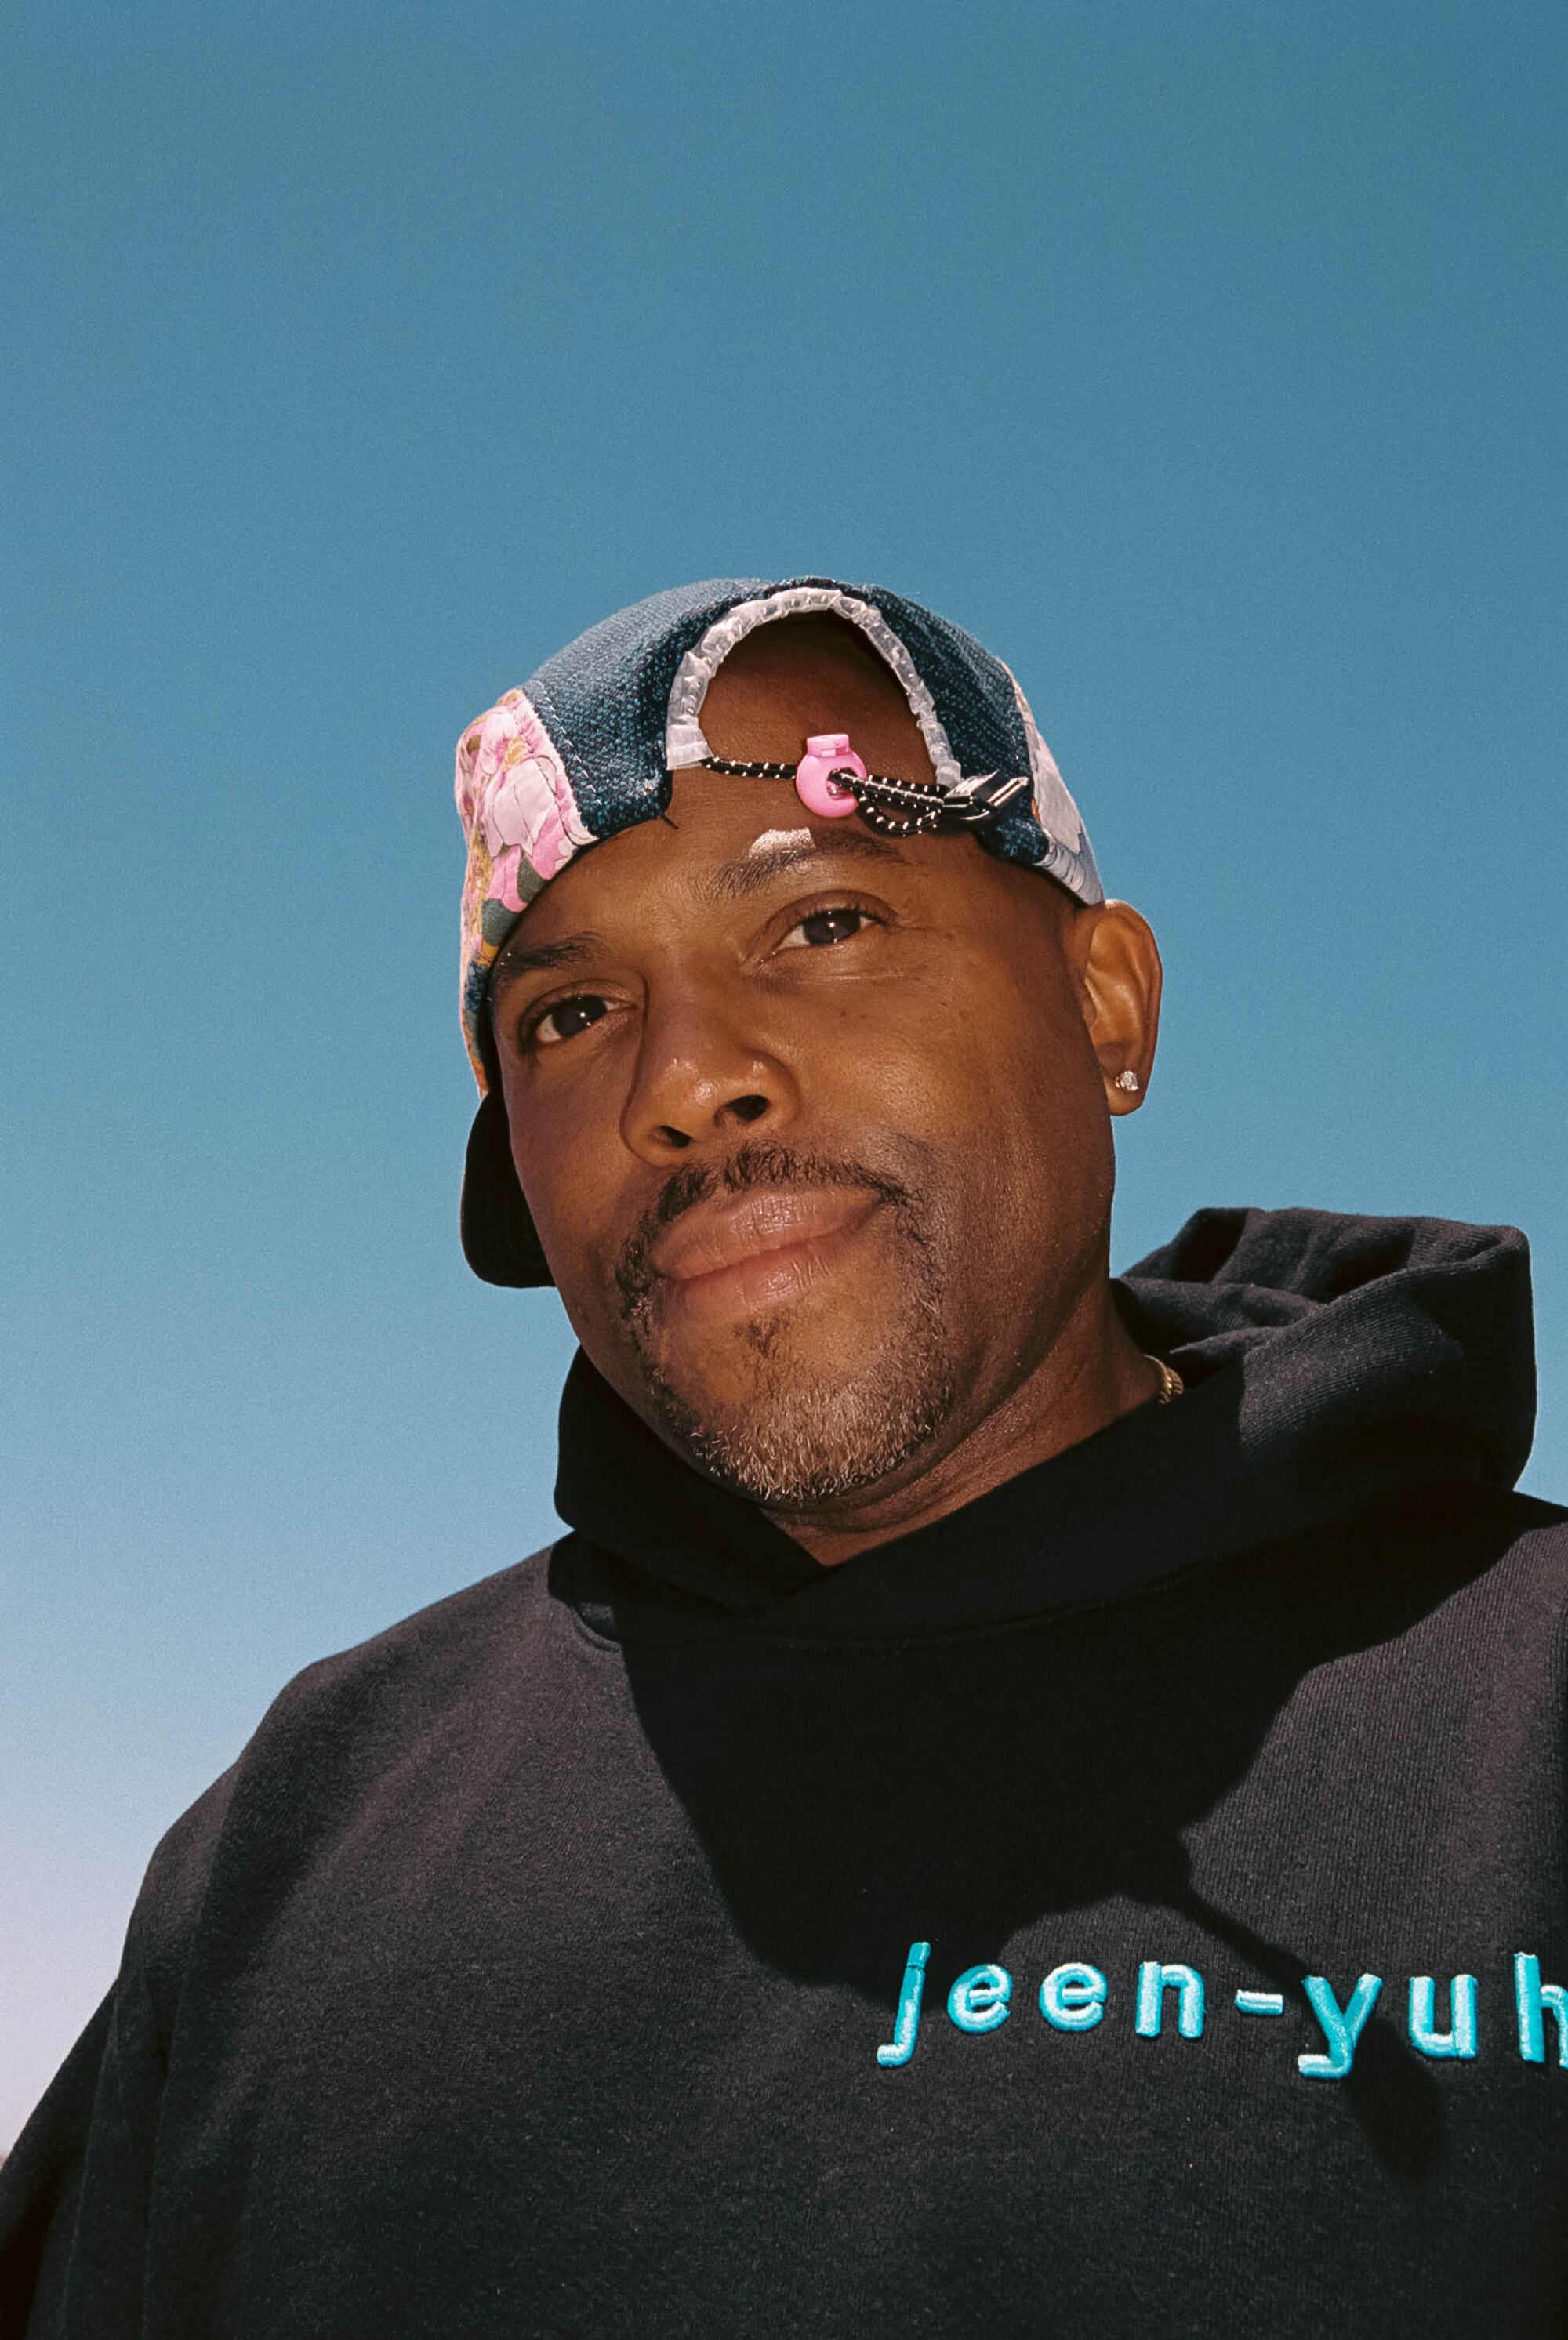 A man poses for a portrait wearring a hat and a sweatshirt, with the sky as a backdrop.